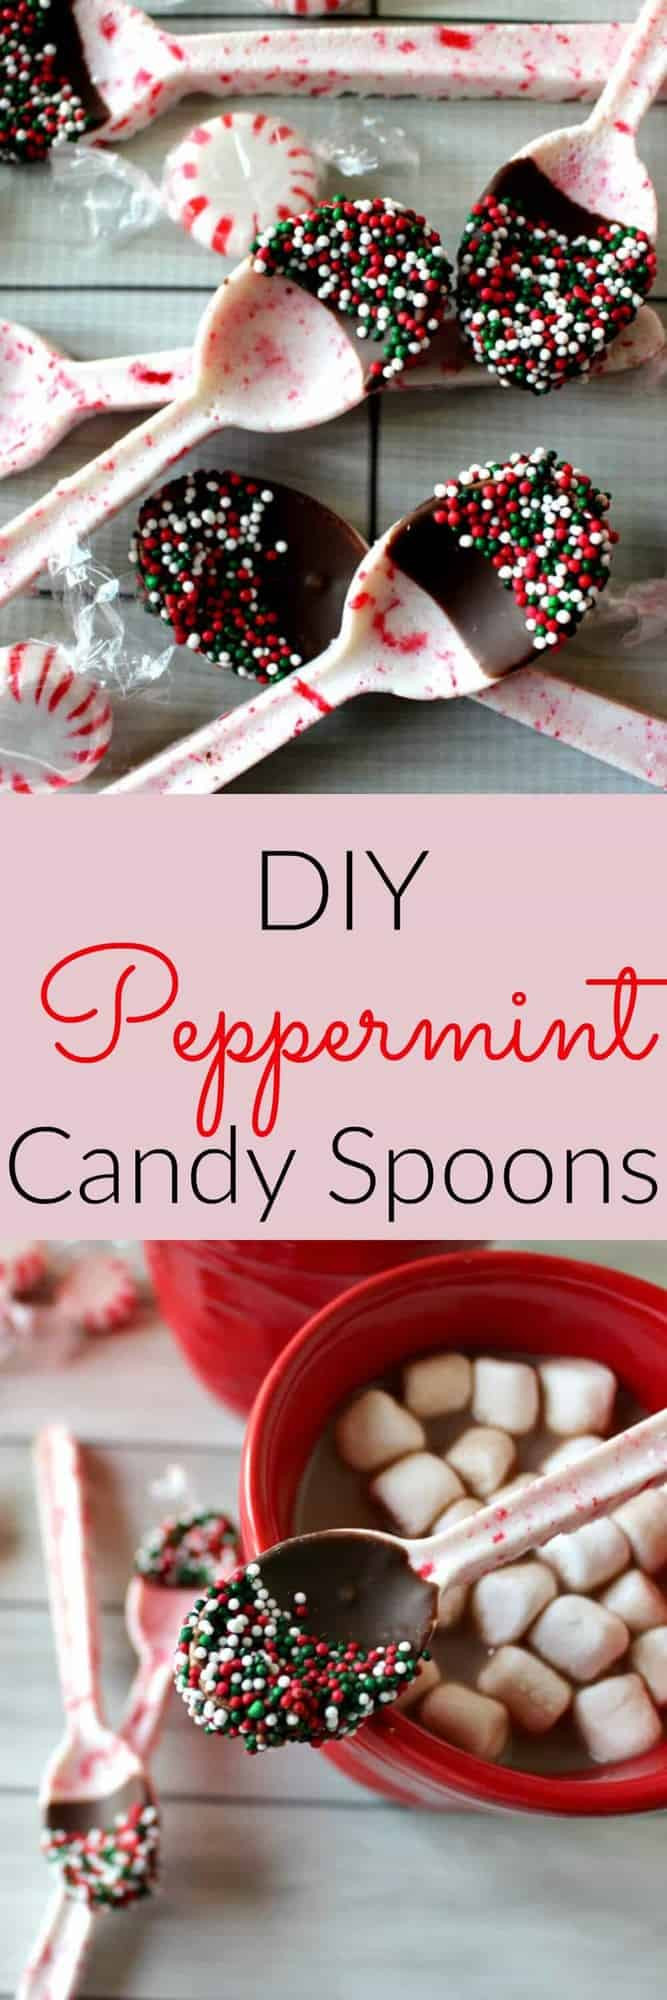 Cute DIY Gifts
 DIY Peppermint Candy Spoons Princess Pinky Girl